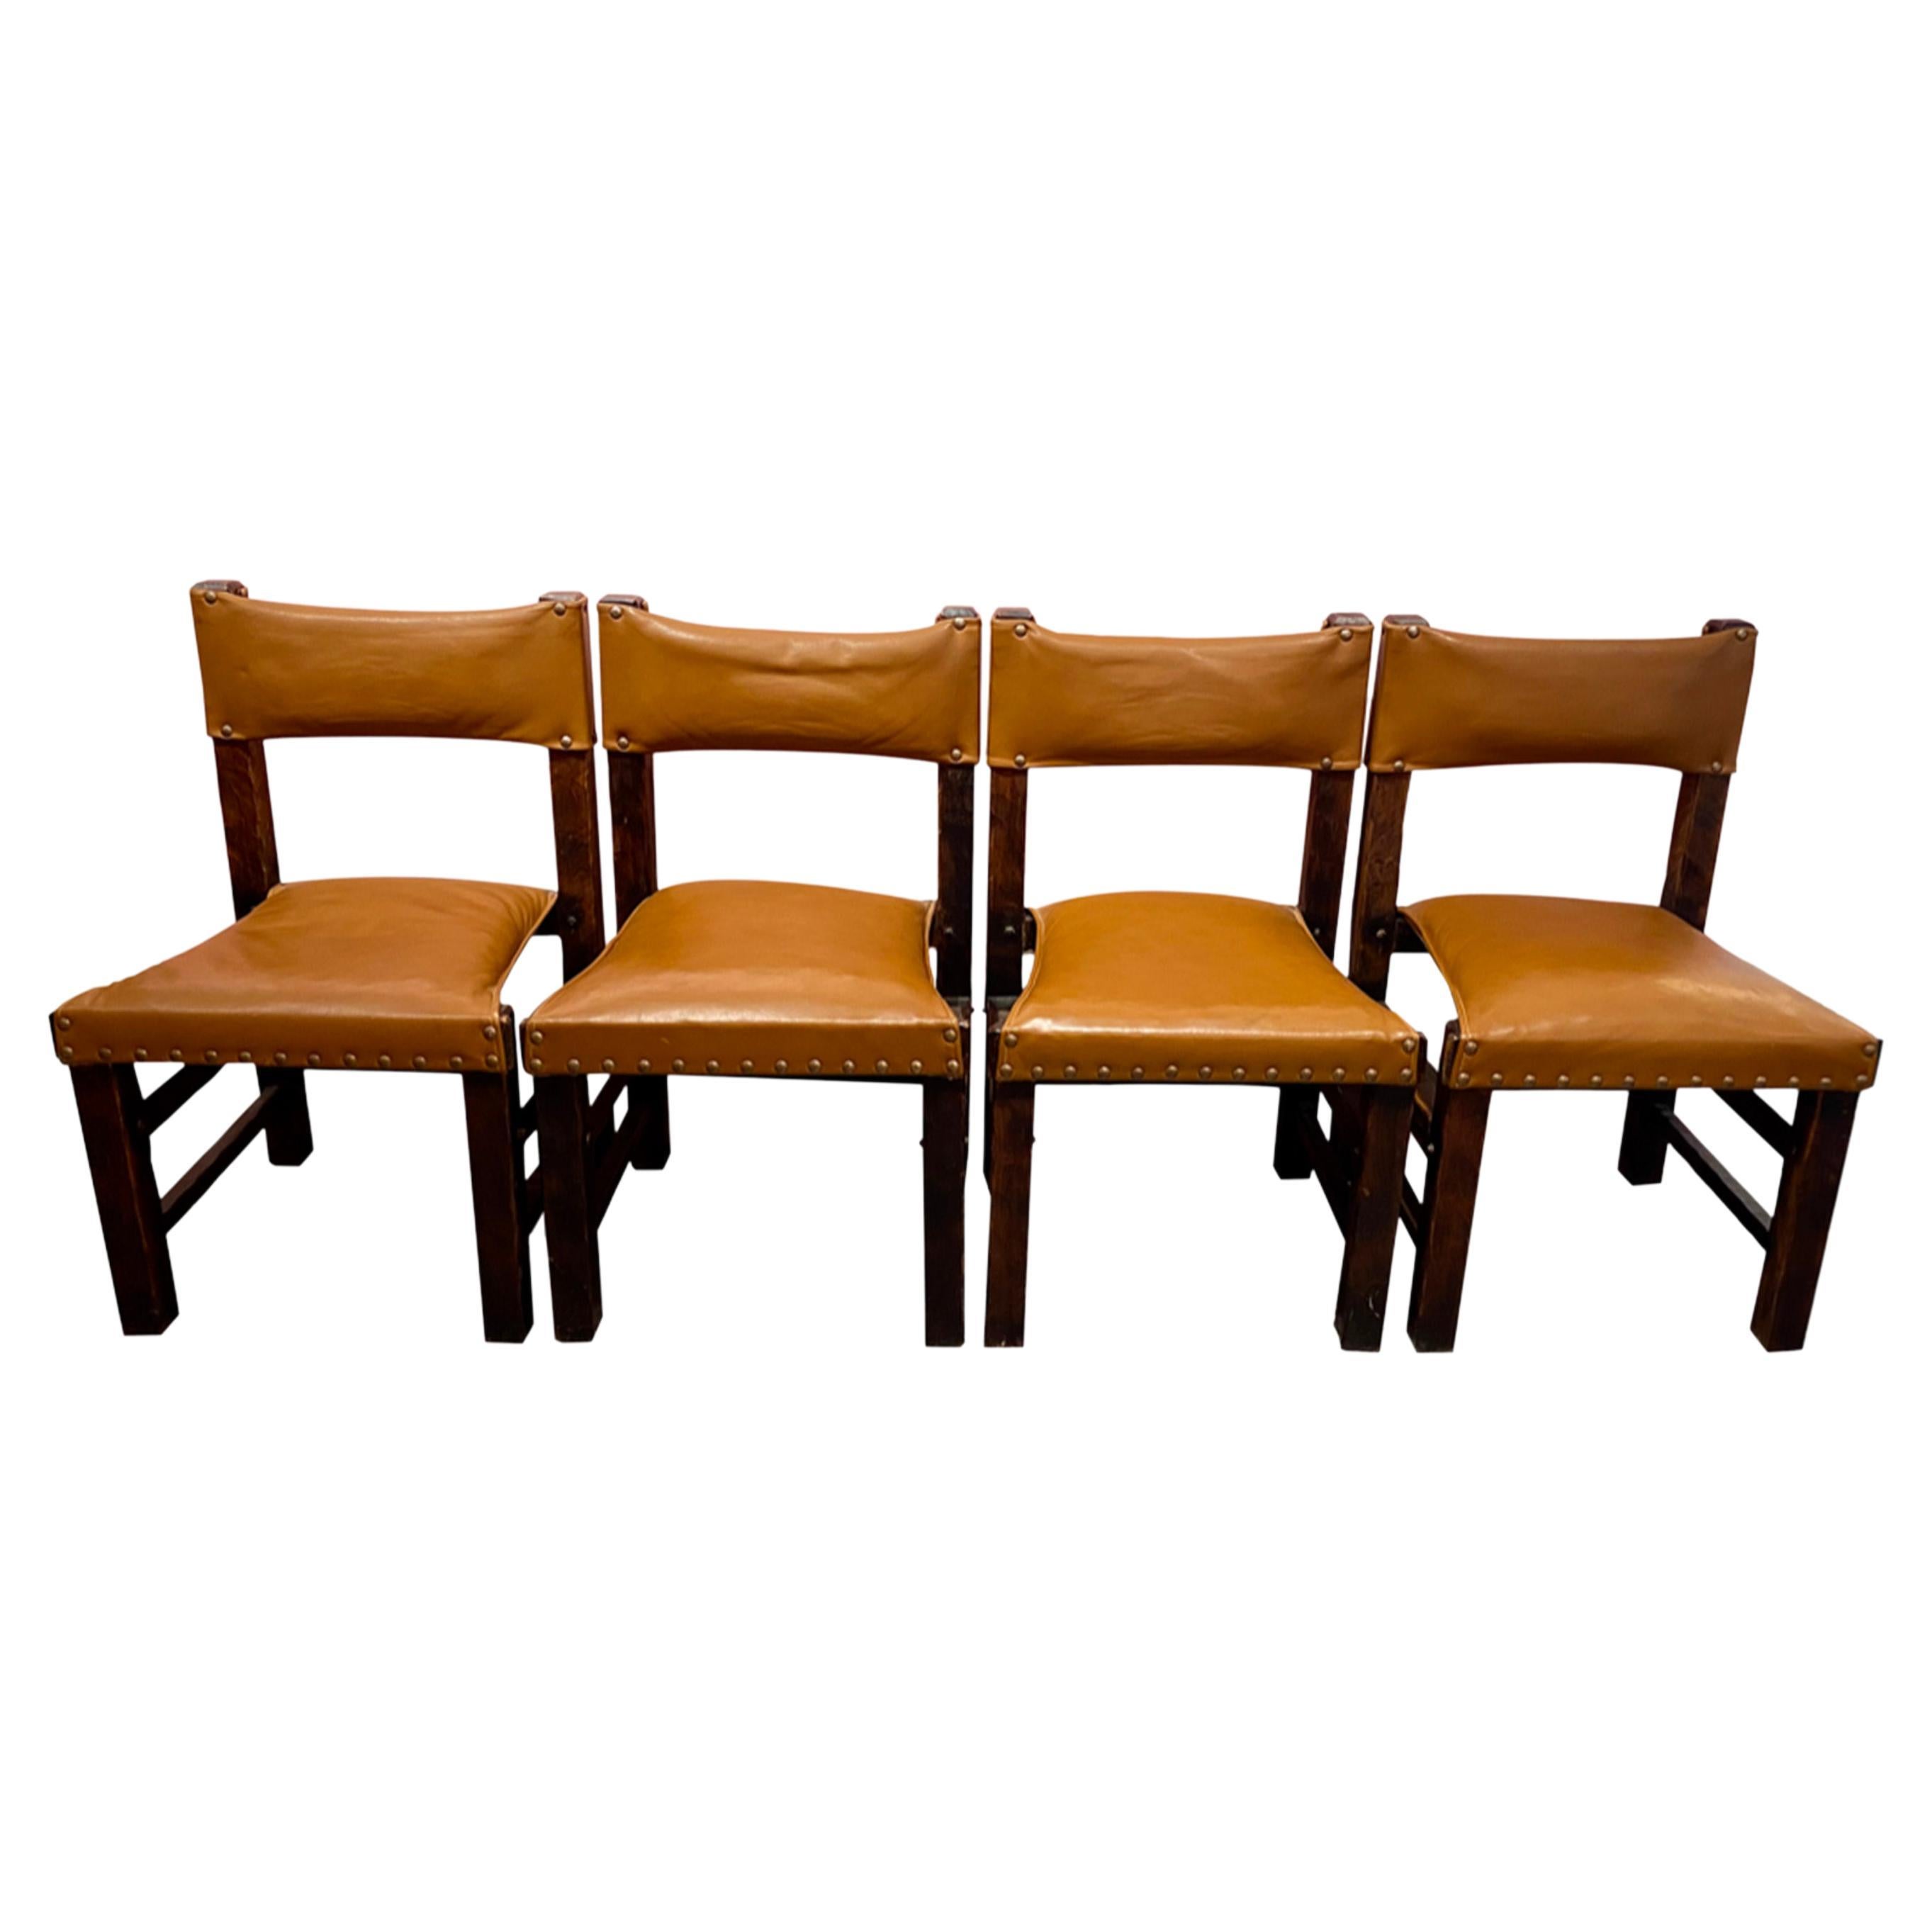 Set of 4 Brazilian chairs from the 60's in leather and wood.